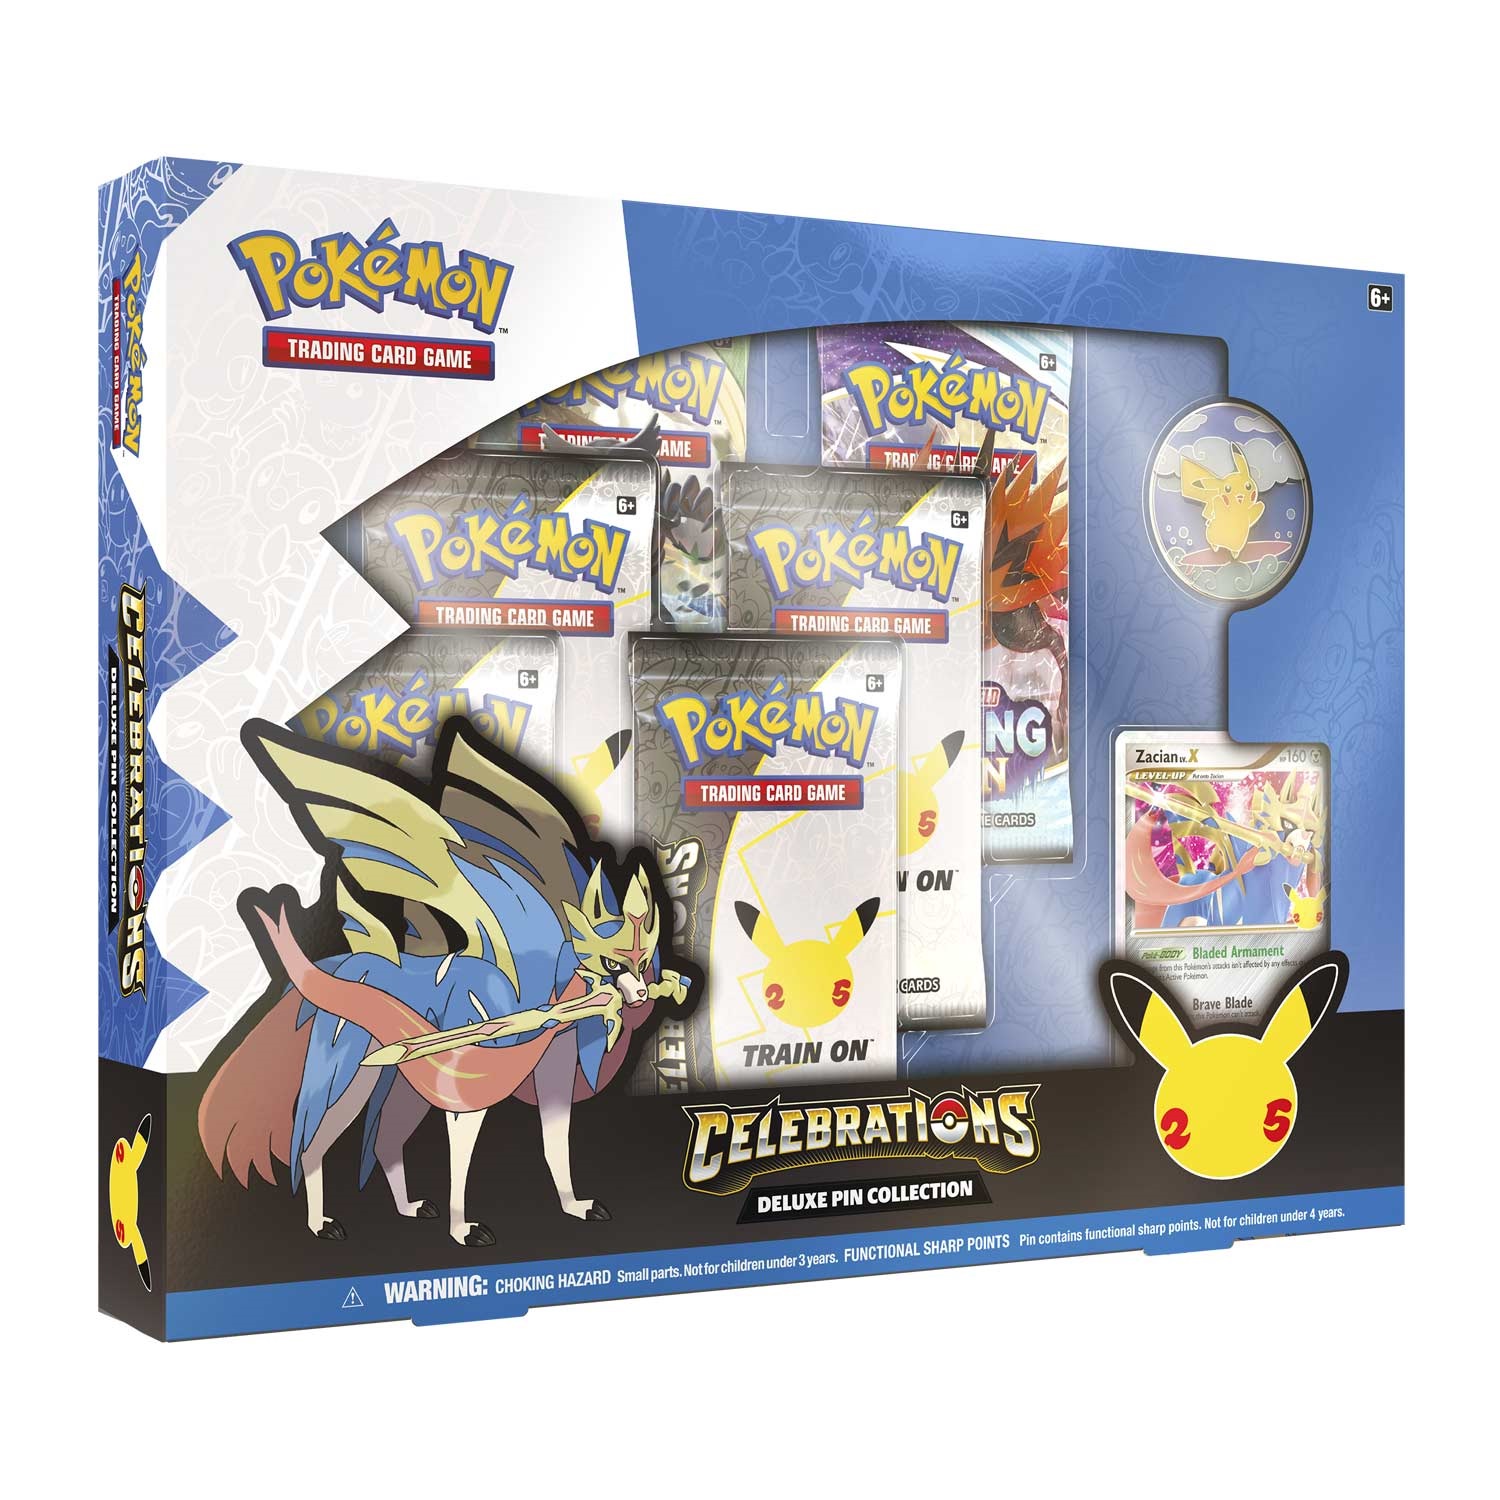 Pokemon TCG: Celebrations - Deluxe Pin Collection Box